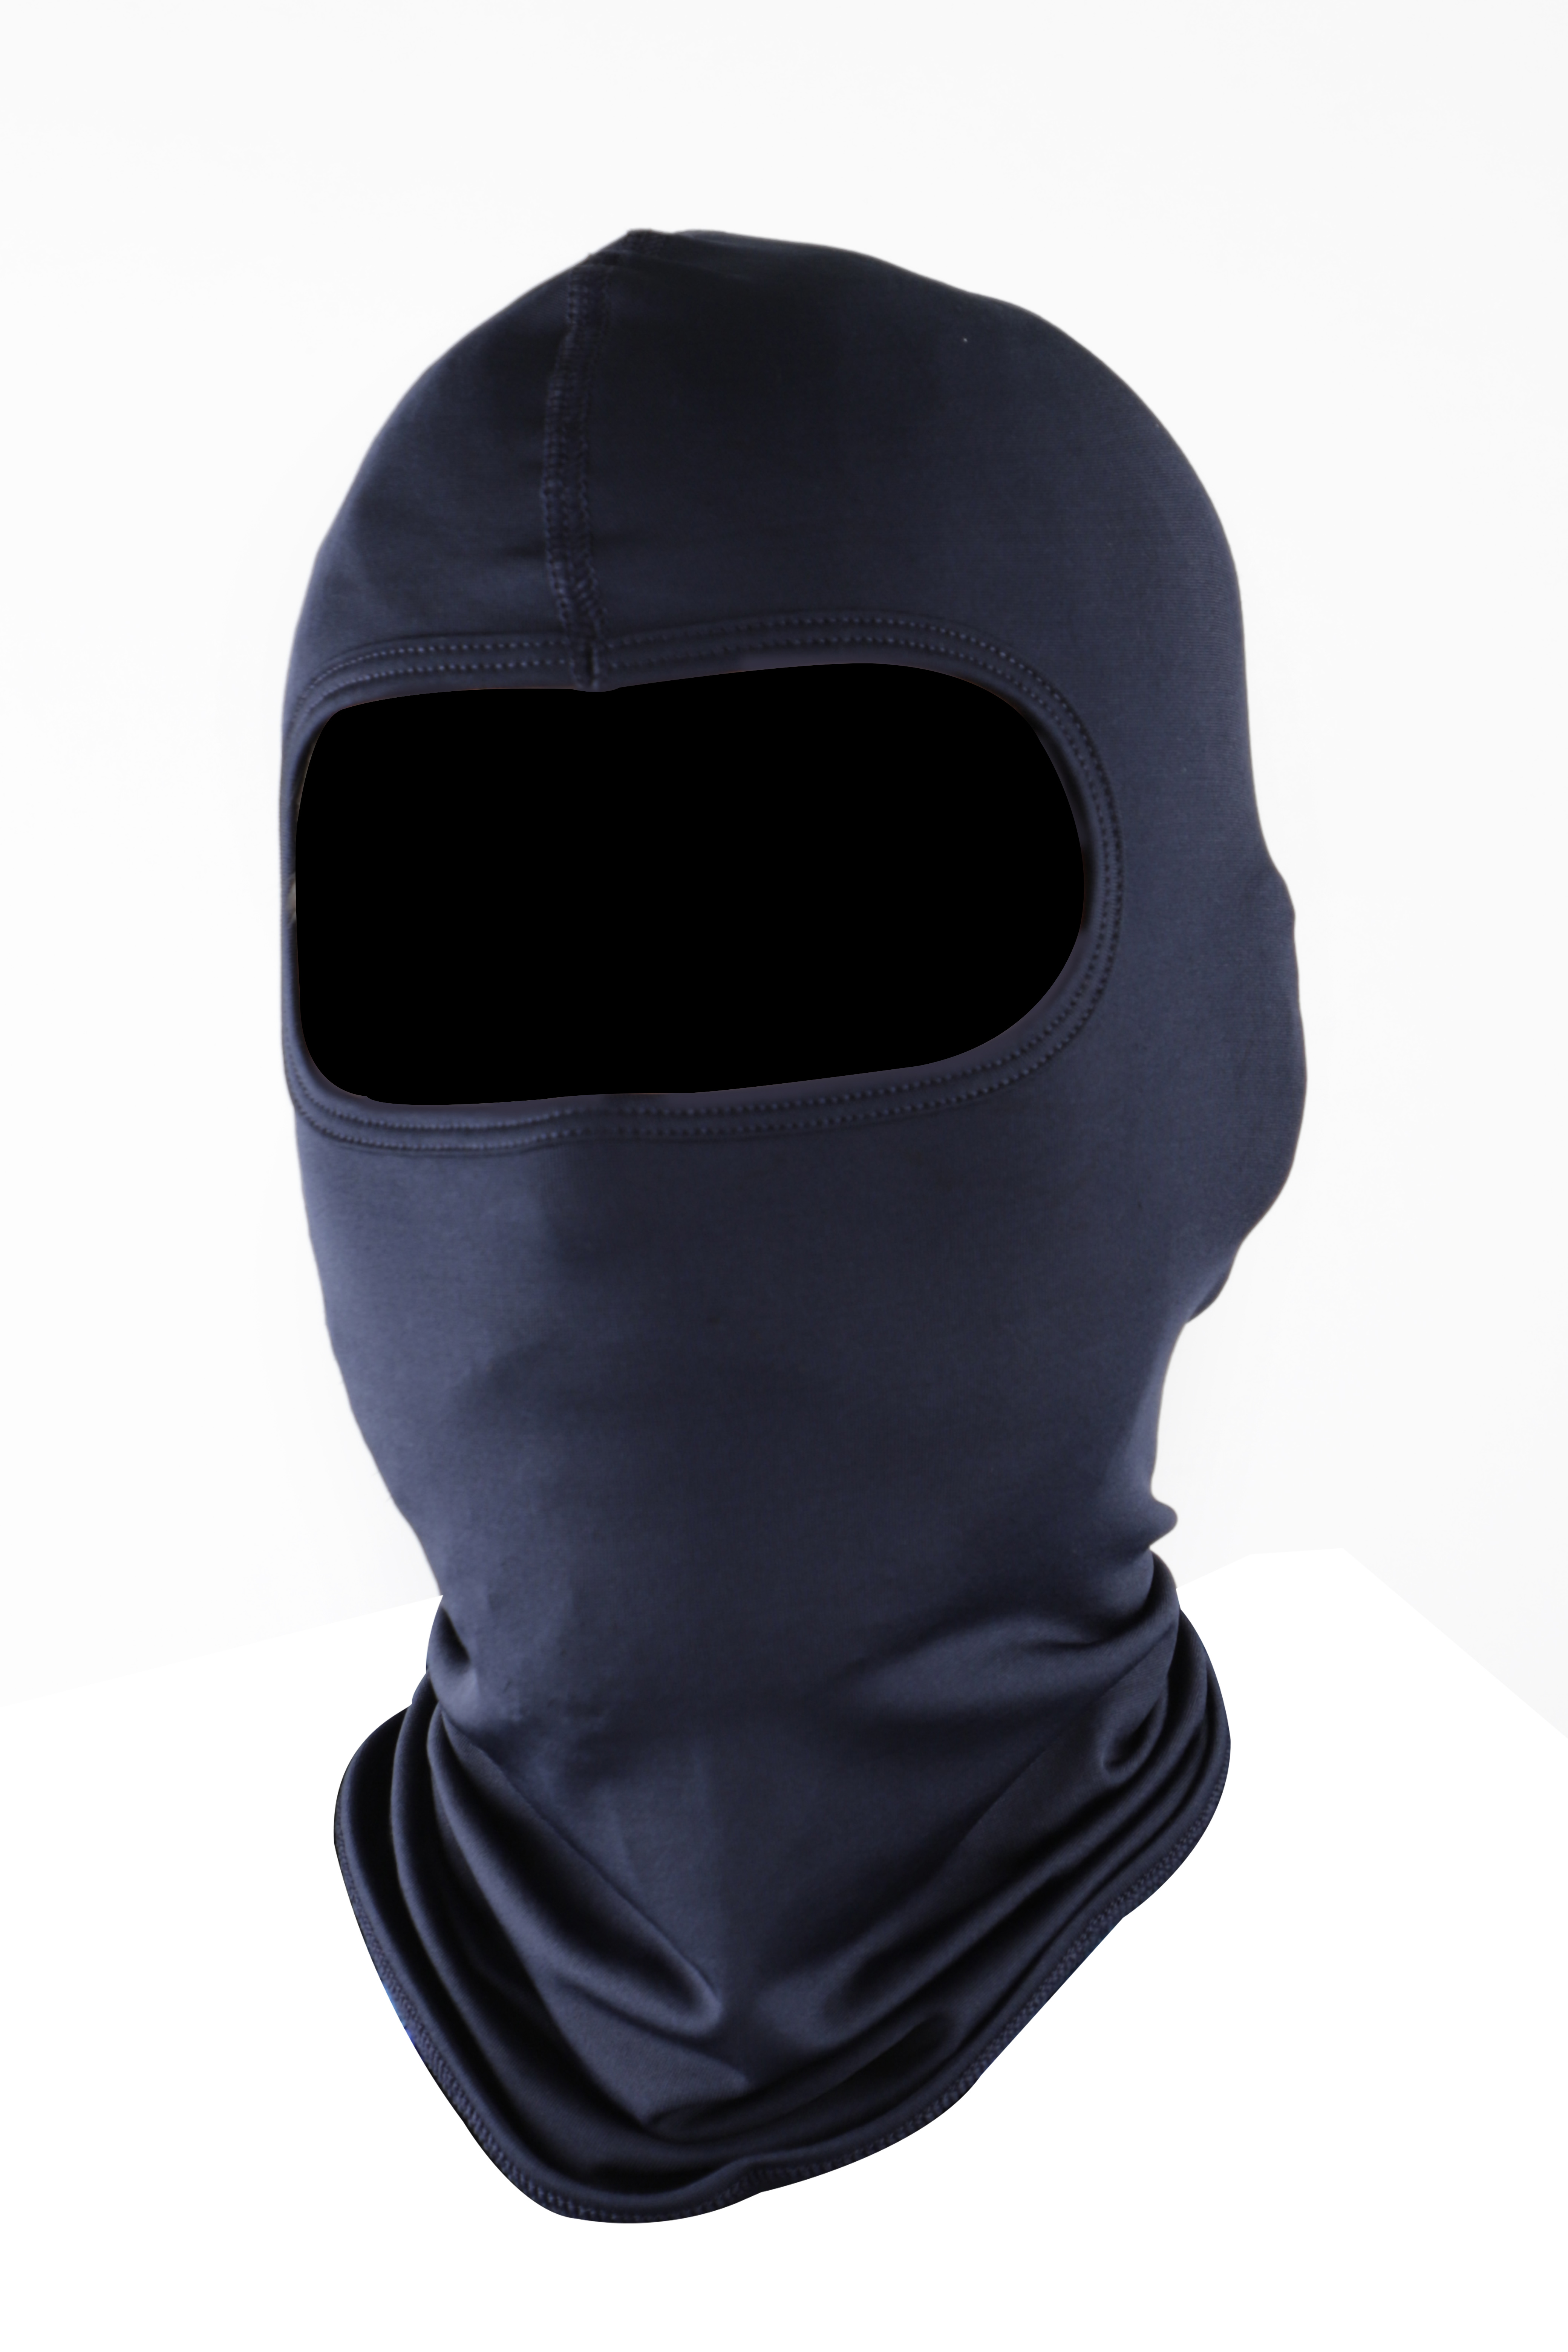 Steelbird Soft Lycra Balaclava Most Suitable For Motorcycling, Running, Sports, Head And Face Cover (Navy)